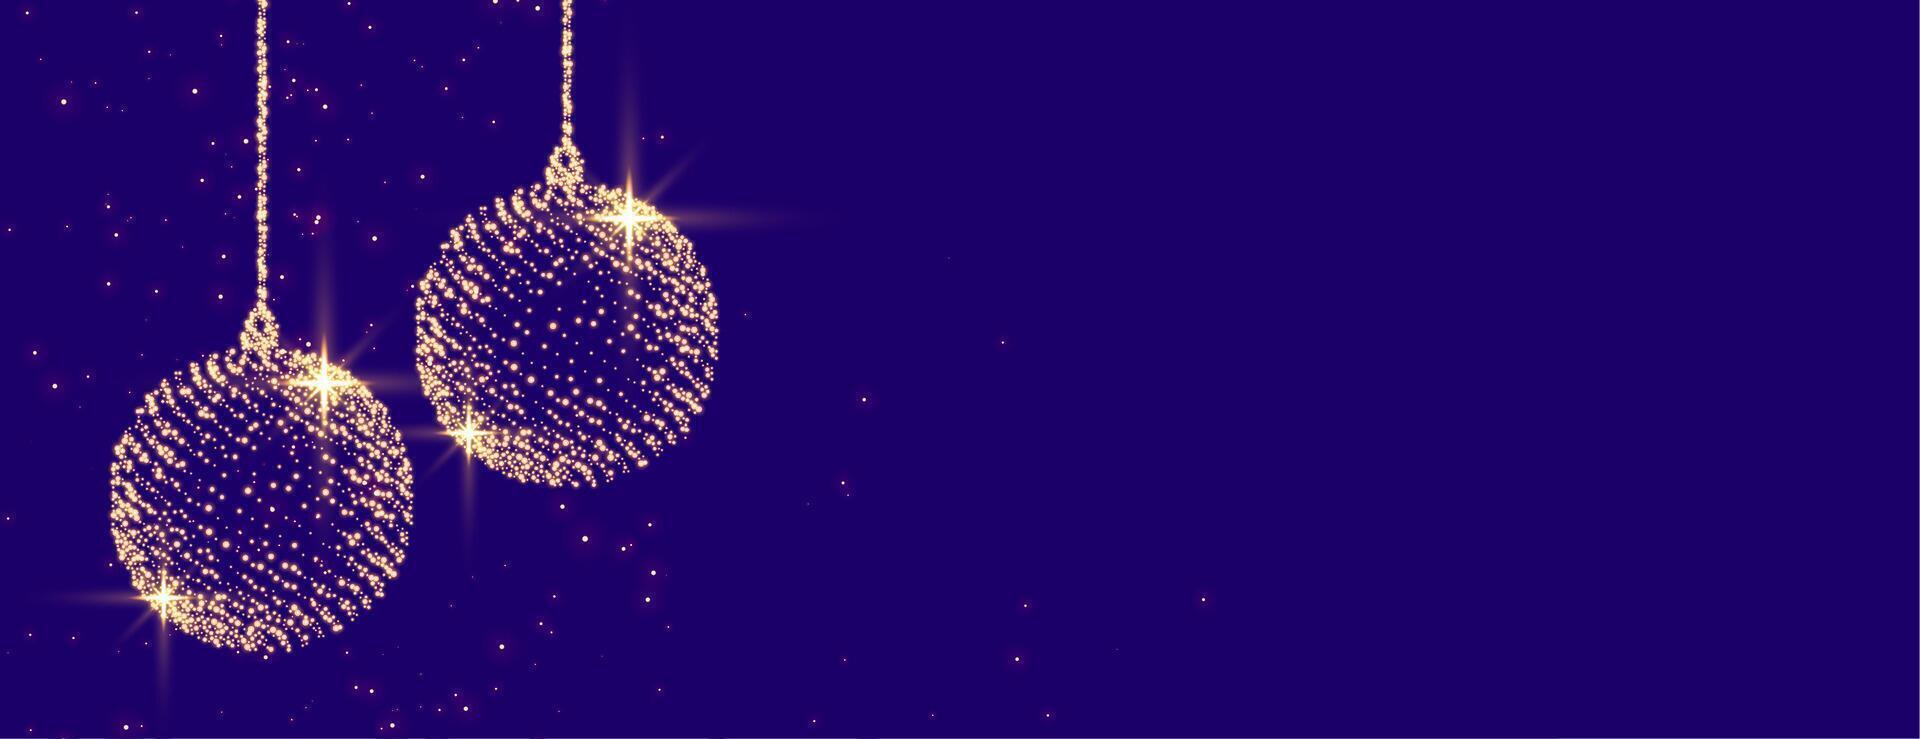 sparkling christmas balls in particle style with text space vector